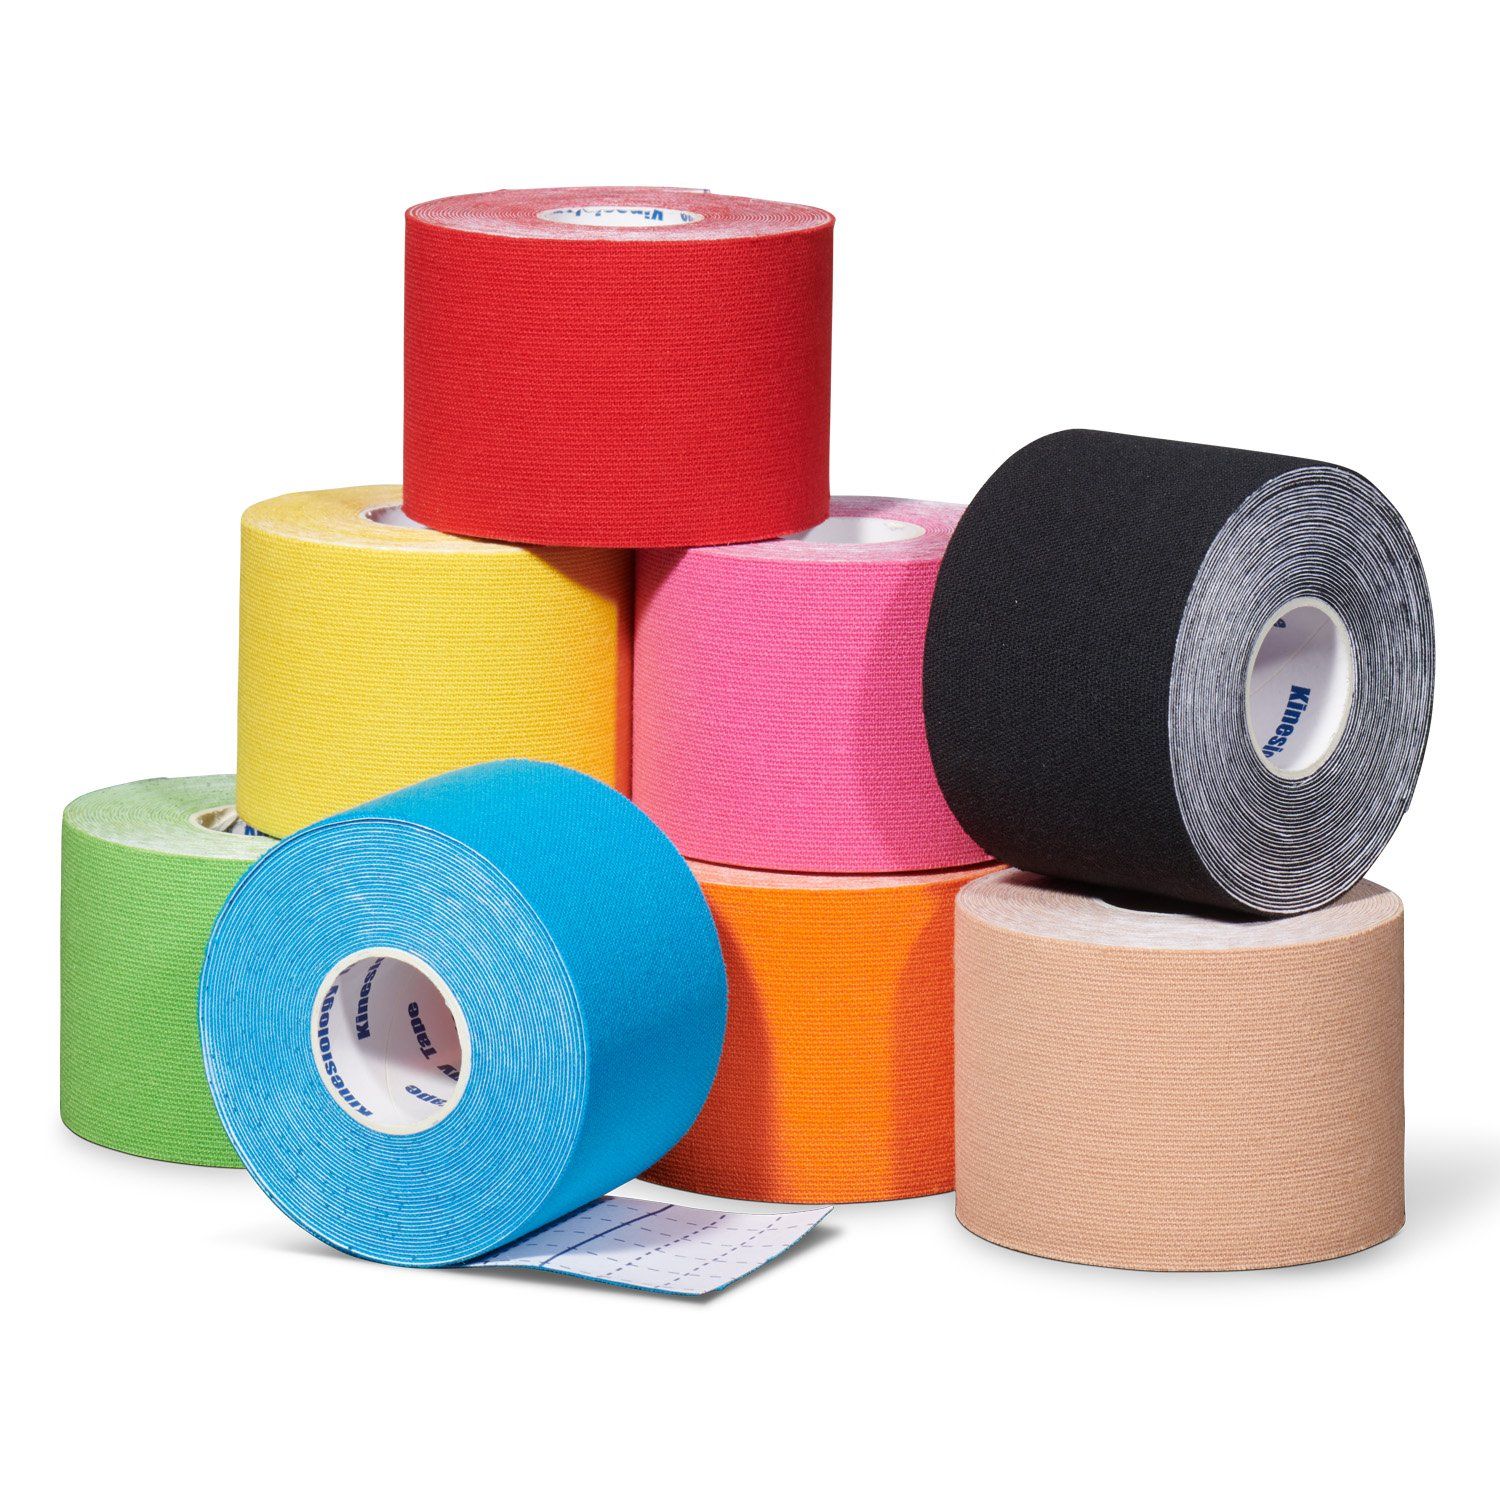 Kinesiology tape 6 rolls plus 2 rolls for free for sale